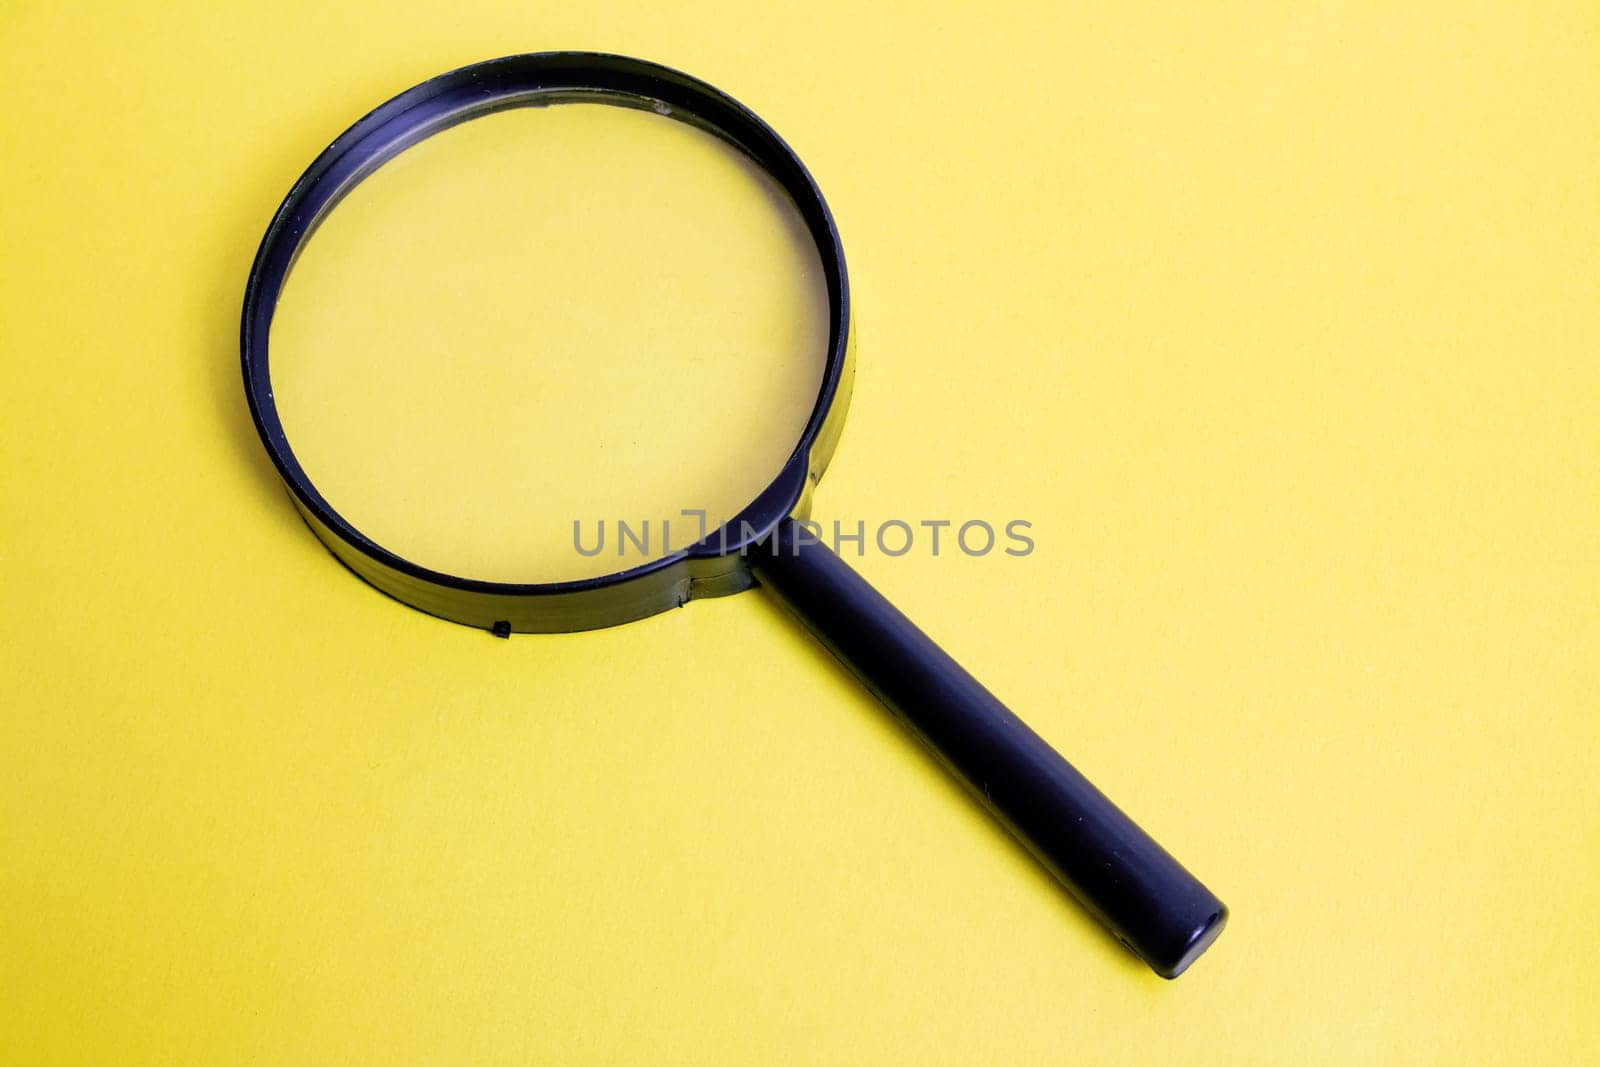 Big magnifier on a yellow background closeup by Vera1703